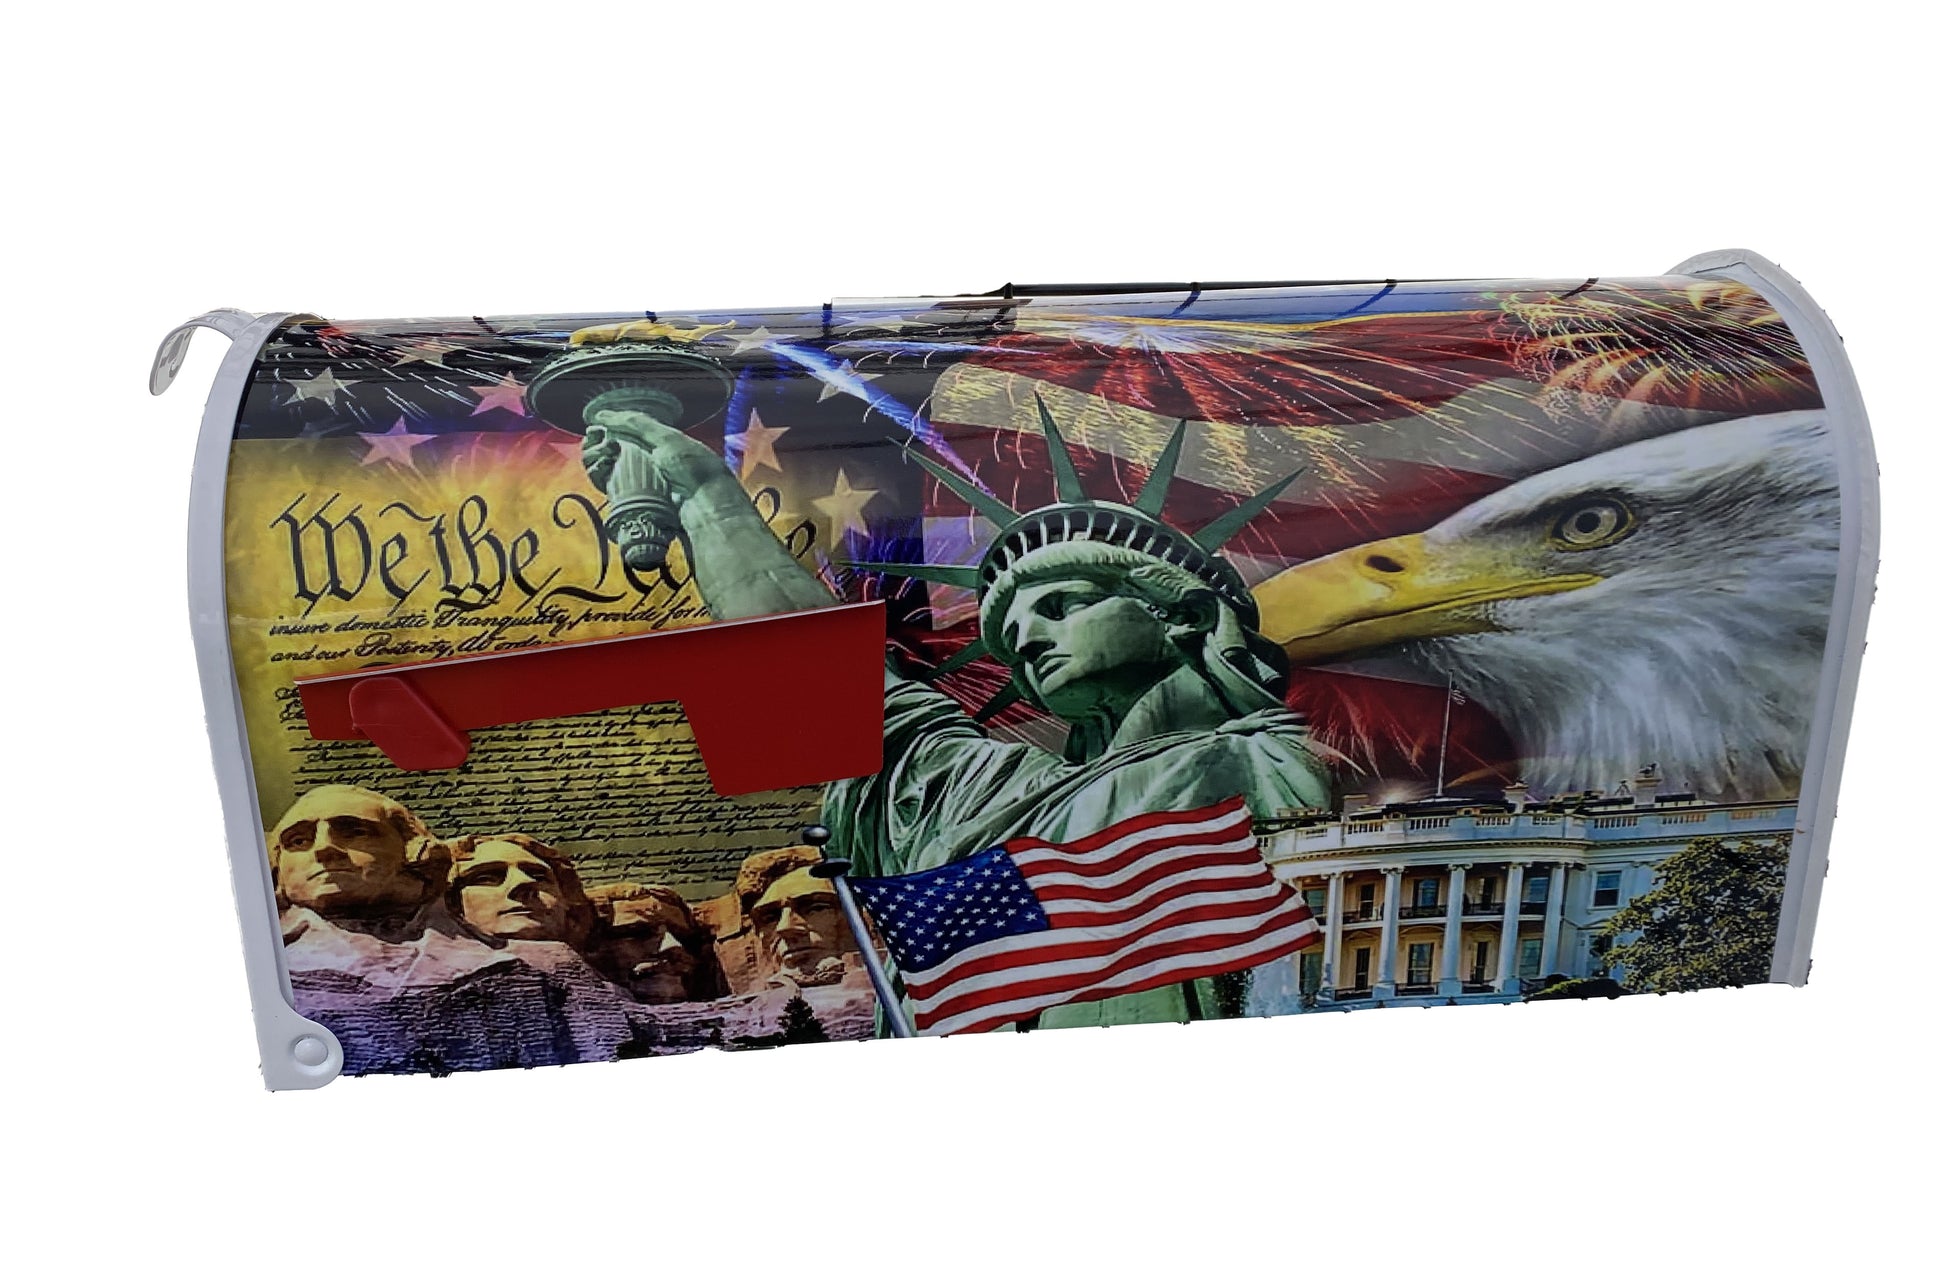 Mailbox with collage of patriotic imagery